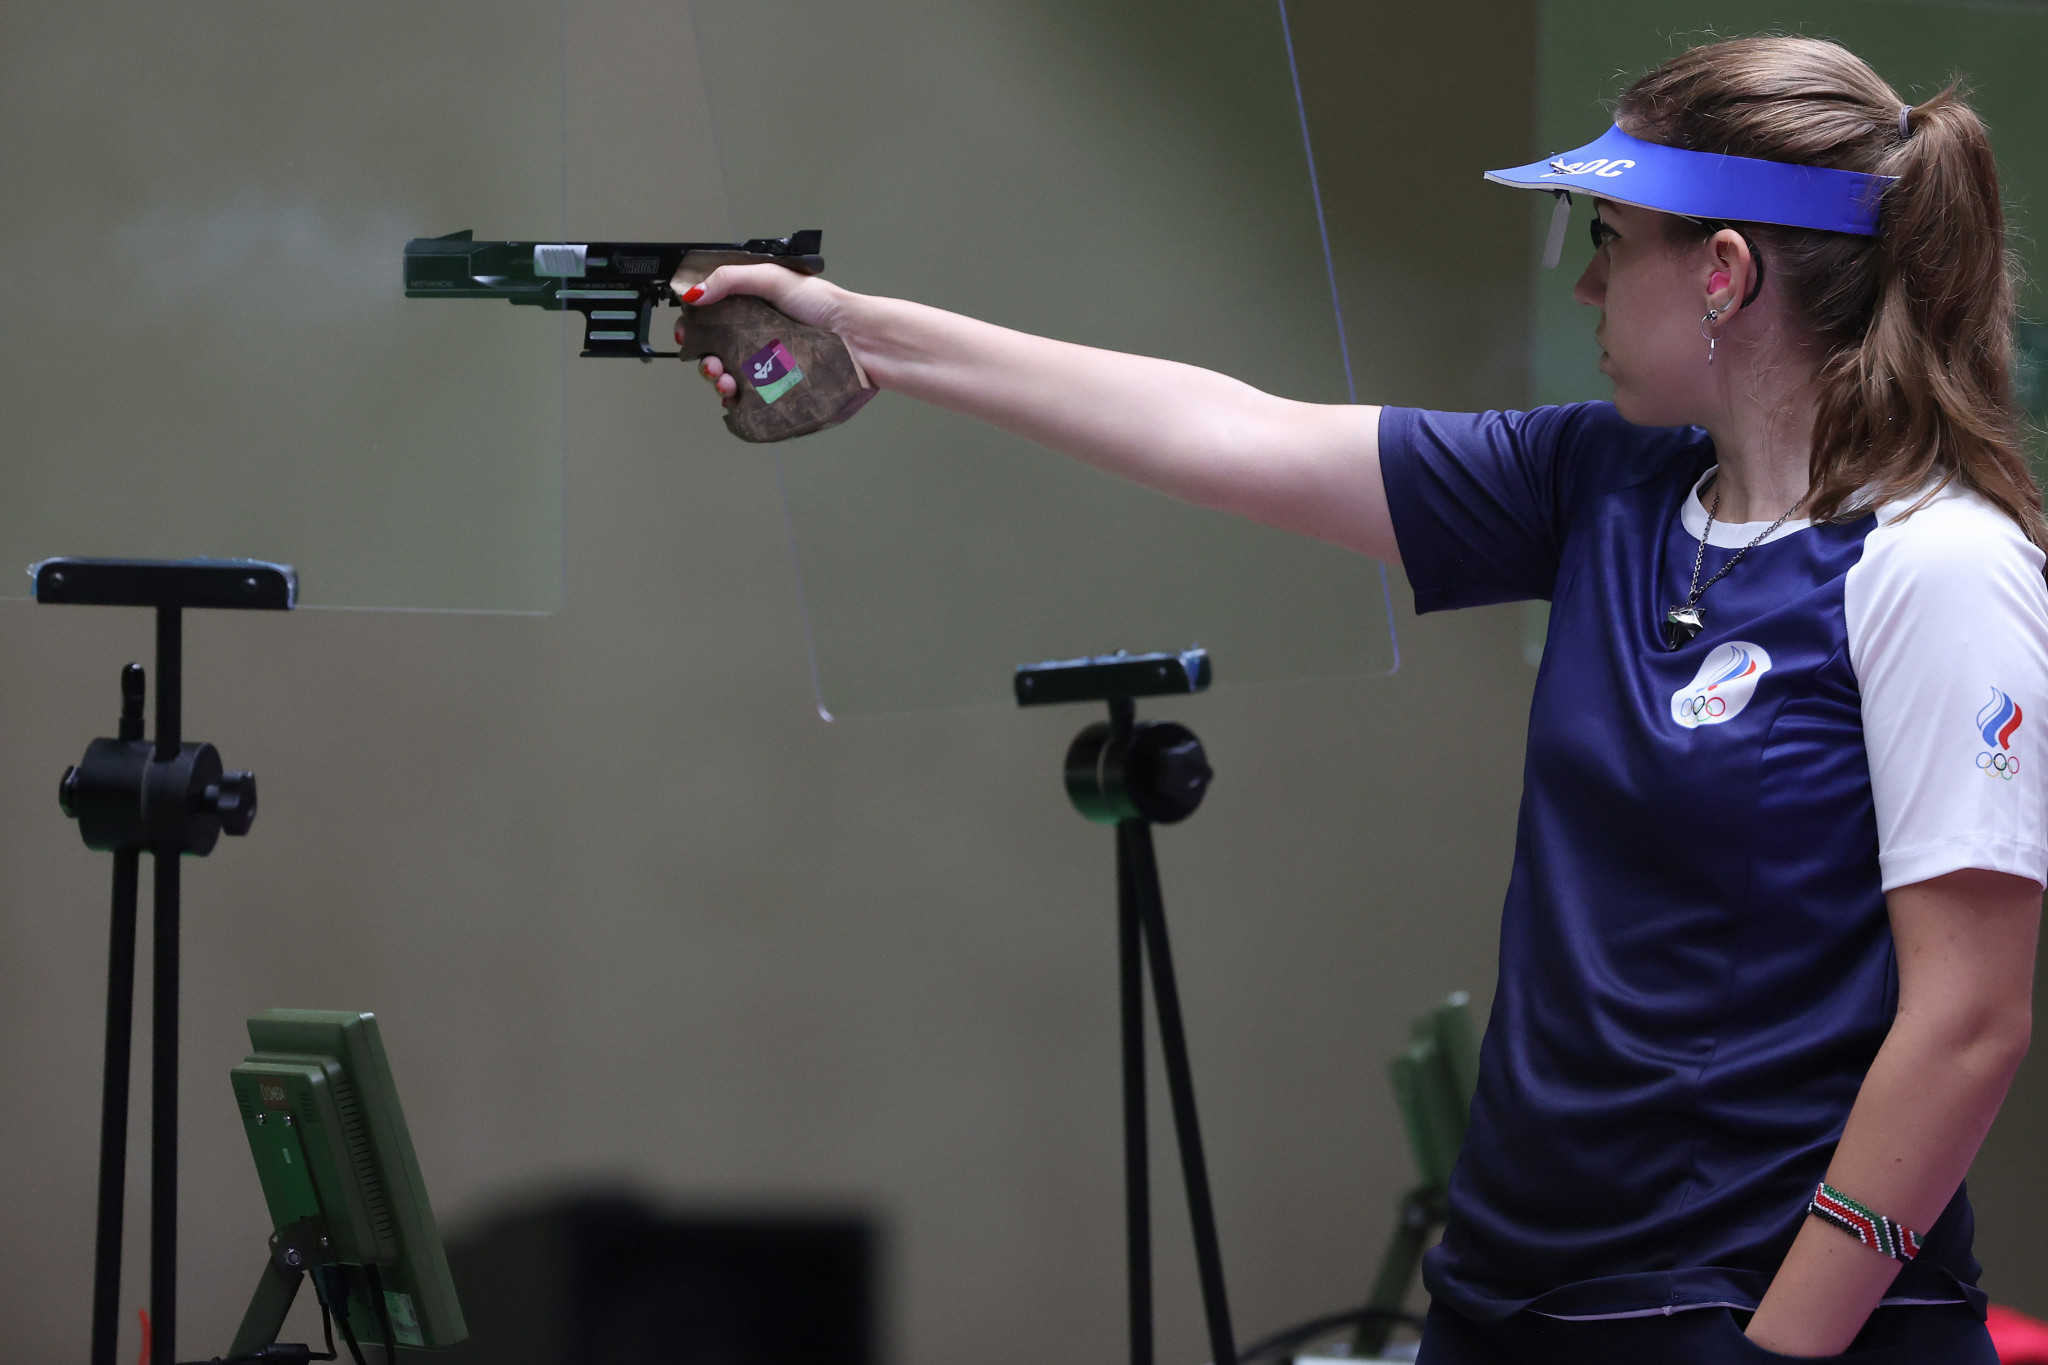 Double Olympic champion Vitalina Batsarashkina is set to compete at the ISSF 10m Grand Prix in Ruše ©Getty Images